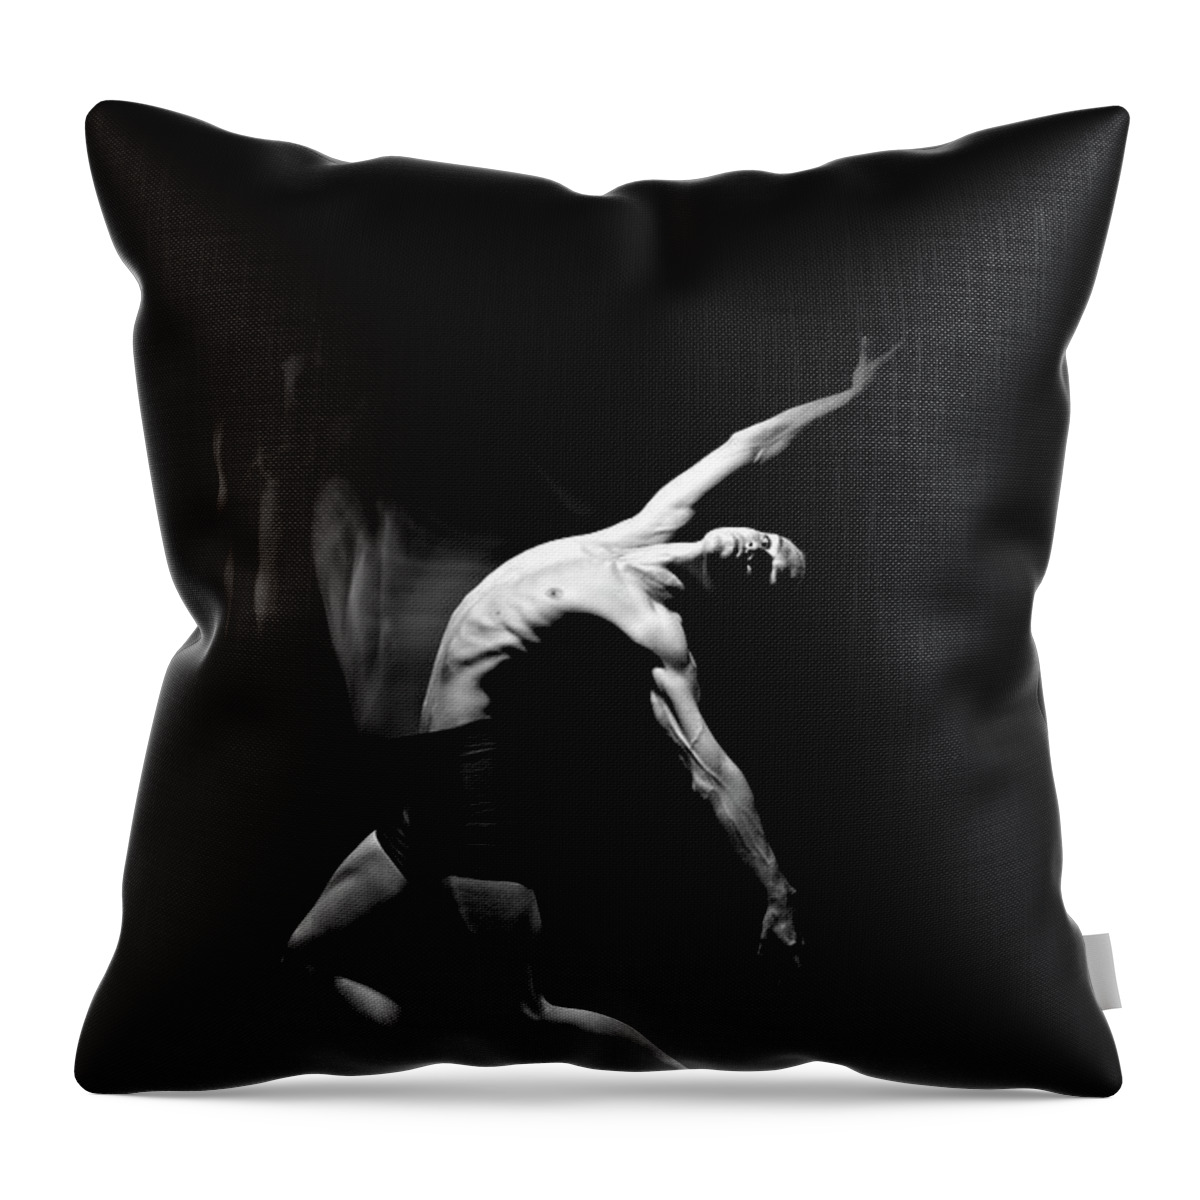 Young Men Throw Pillow featuring the photograph Black And White Photo Of A Male Ballet by Allgord